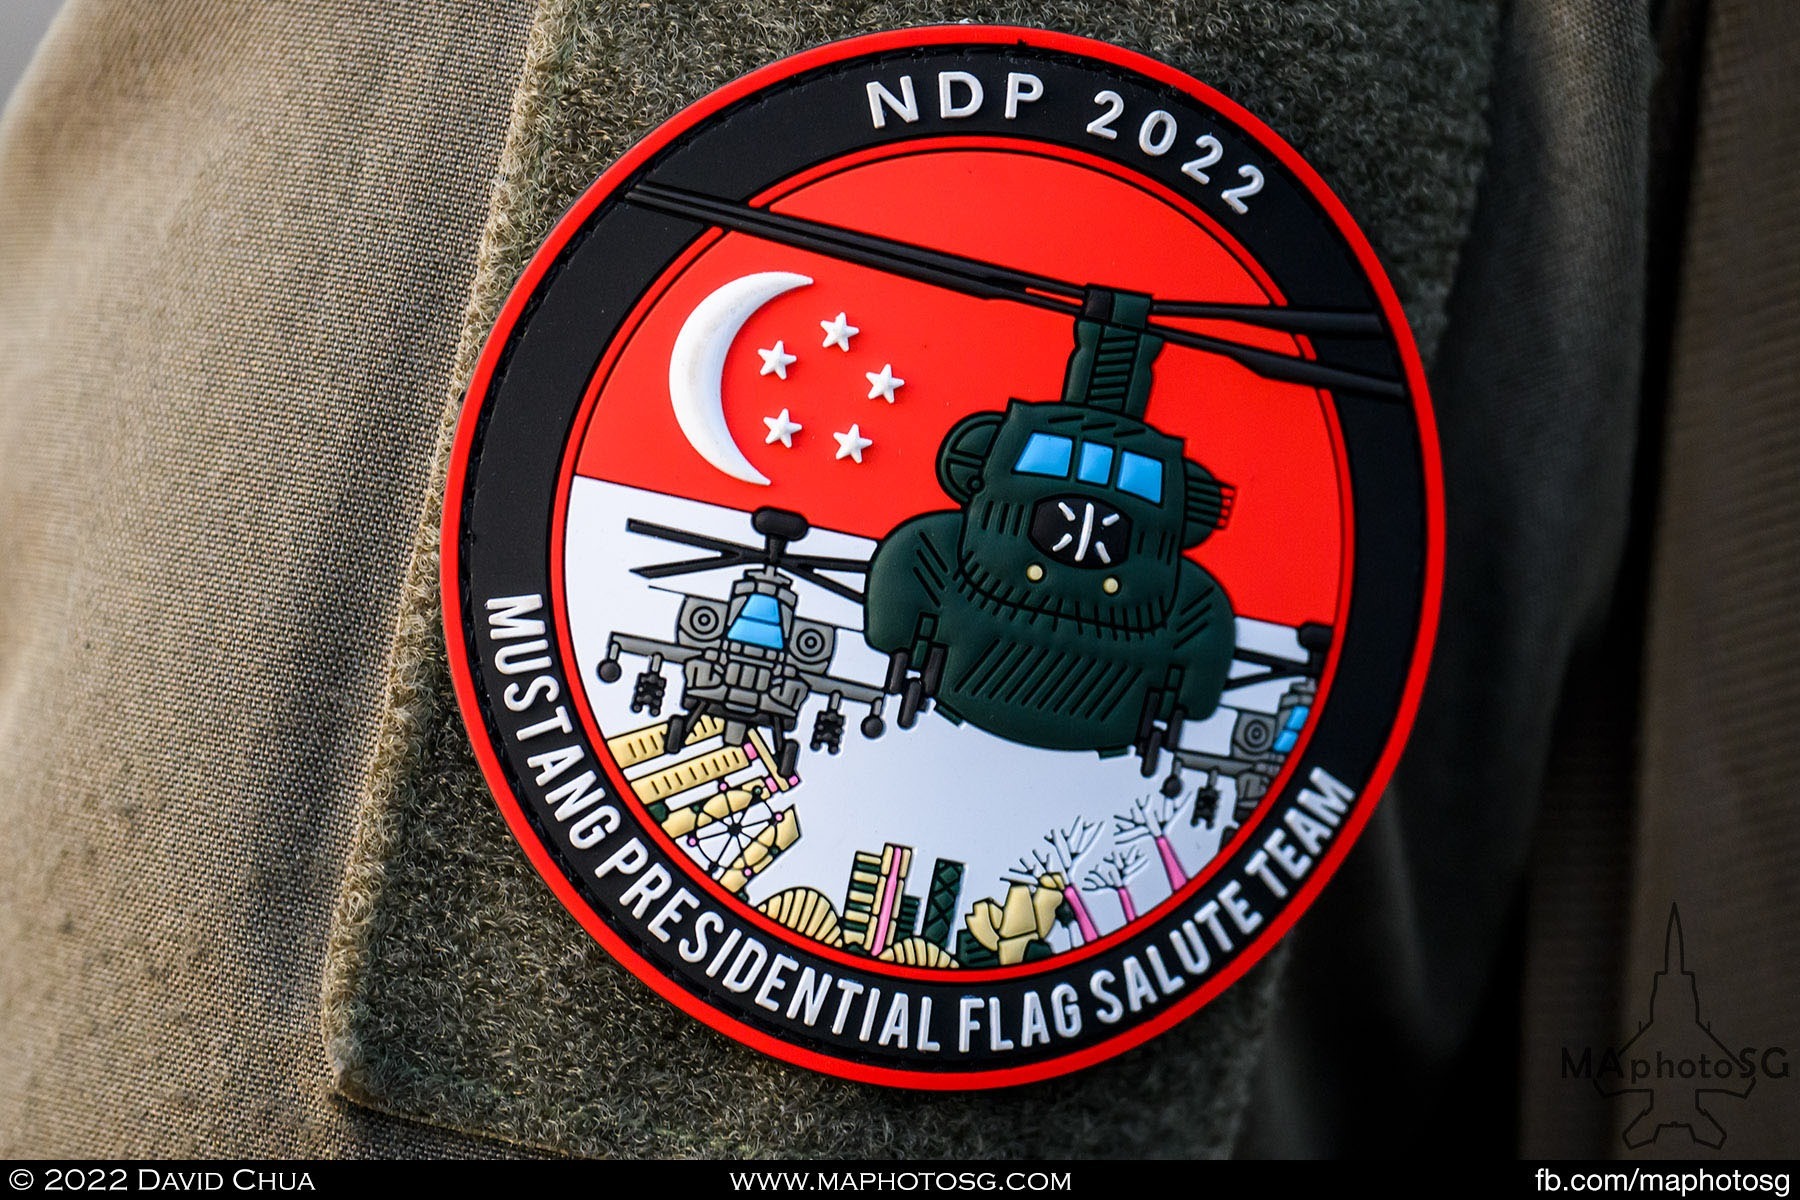 Aircew patch of the NDP 2022 Flag Salute Team